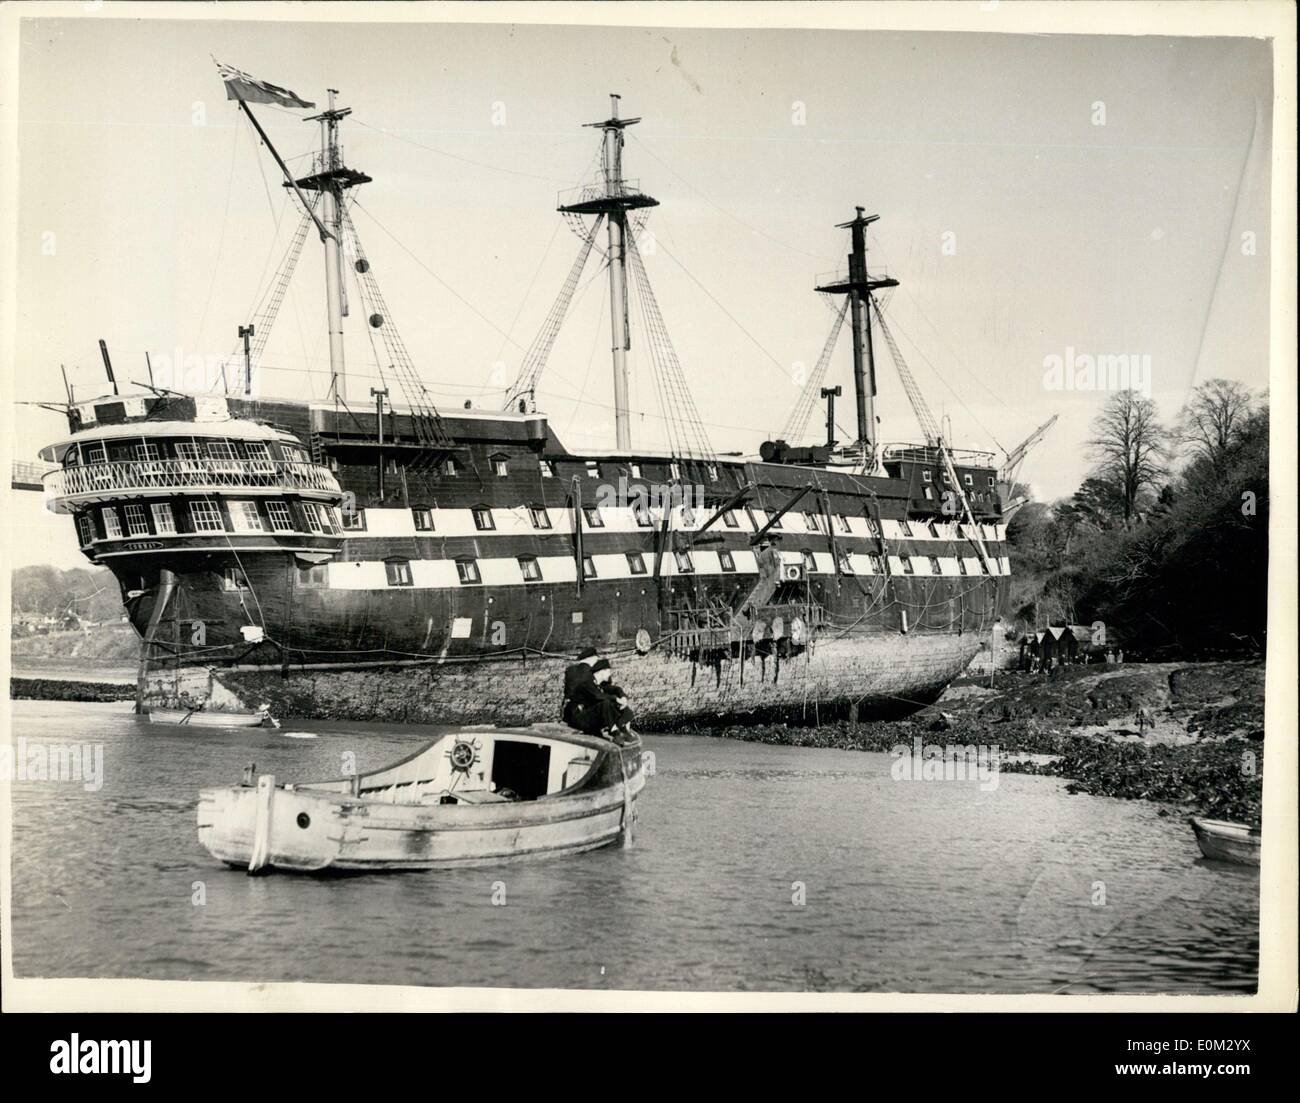 Apr. 15, 1953 - ANCIENT WARSHIP GOES AGROUND NEAR SUSPENSION BRIDGE..THE 'CONWAY' FORMER VESSEL OF THE LINE... The 114 year old Stock Photo